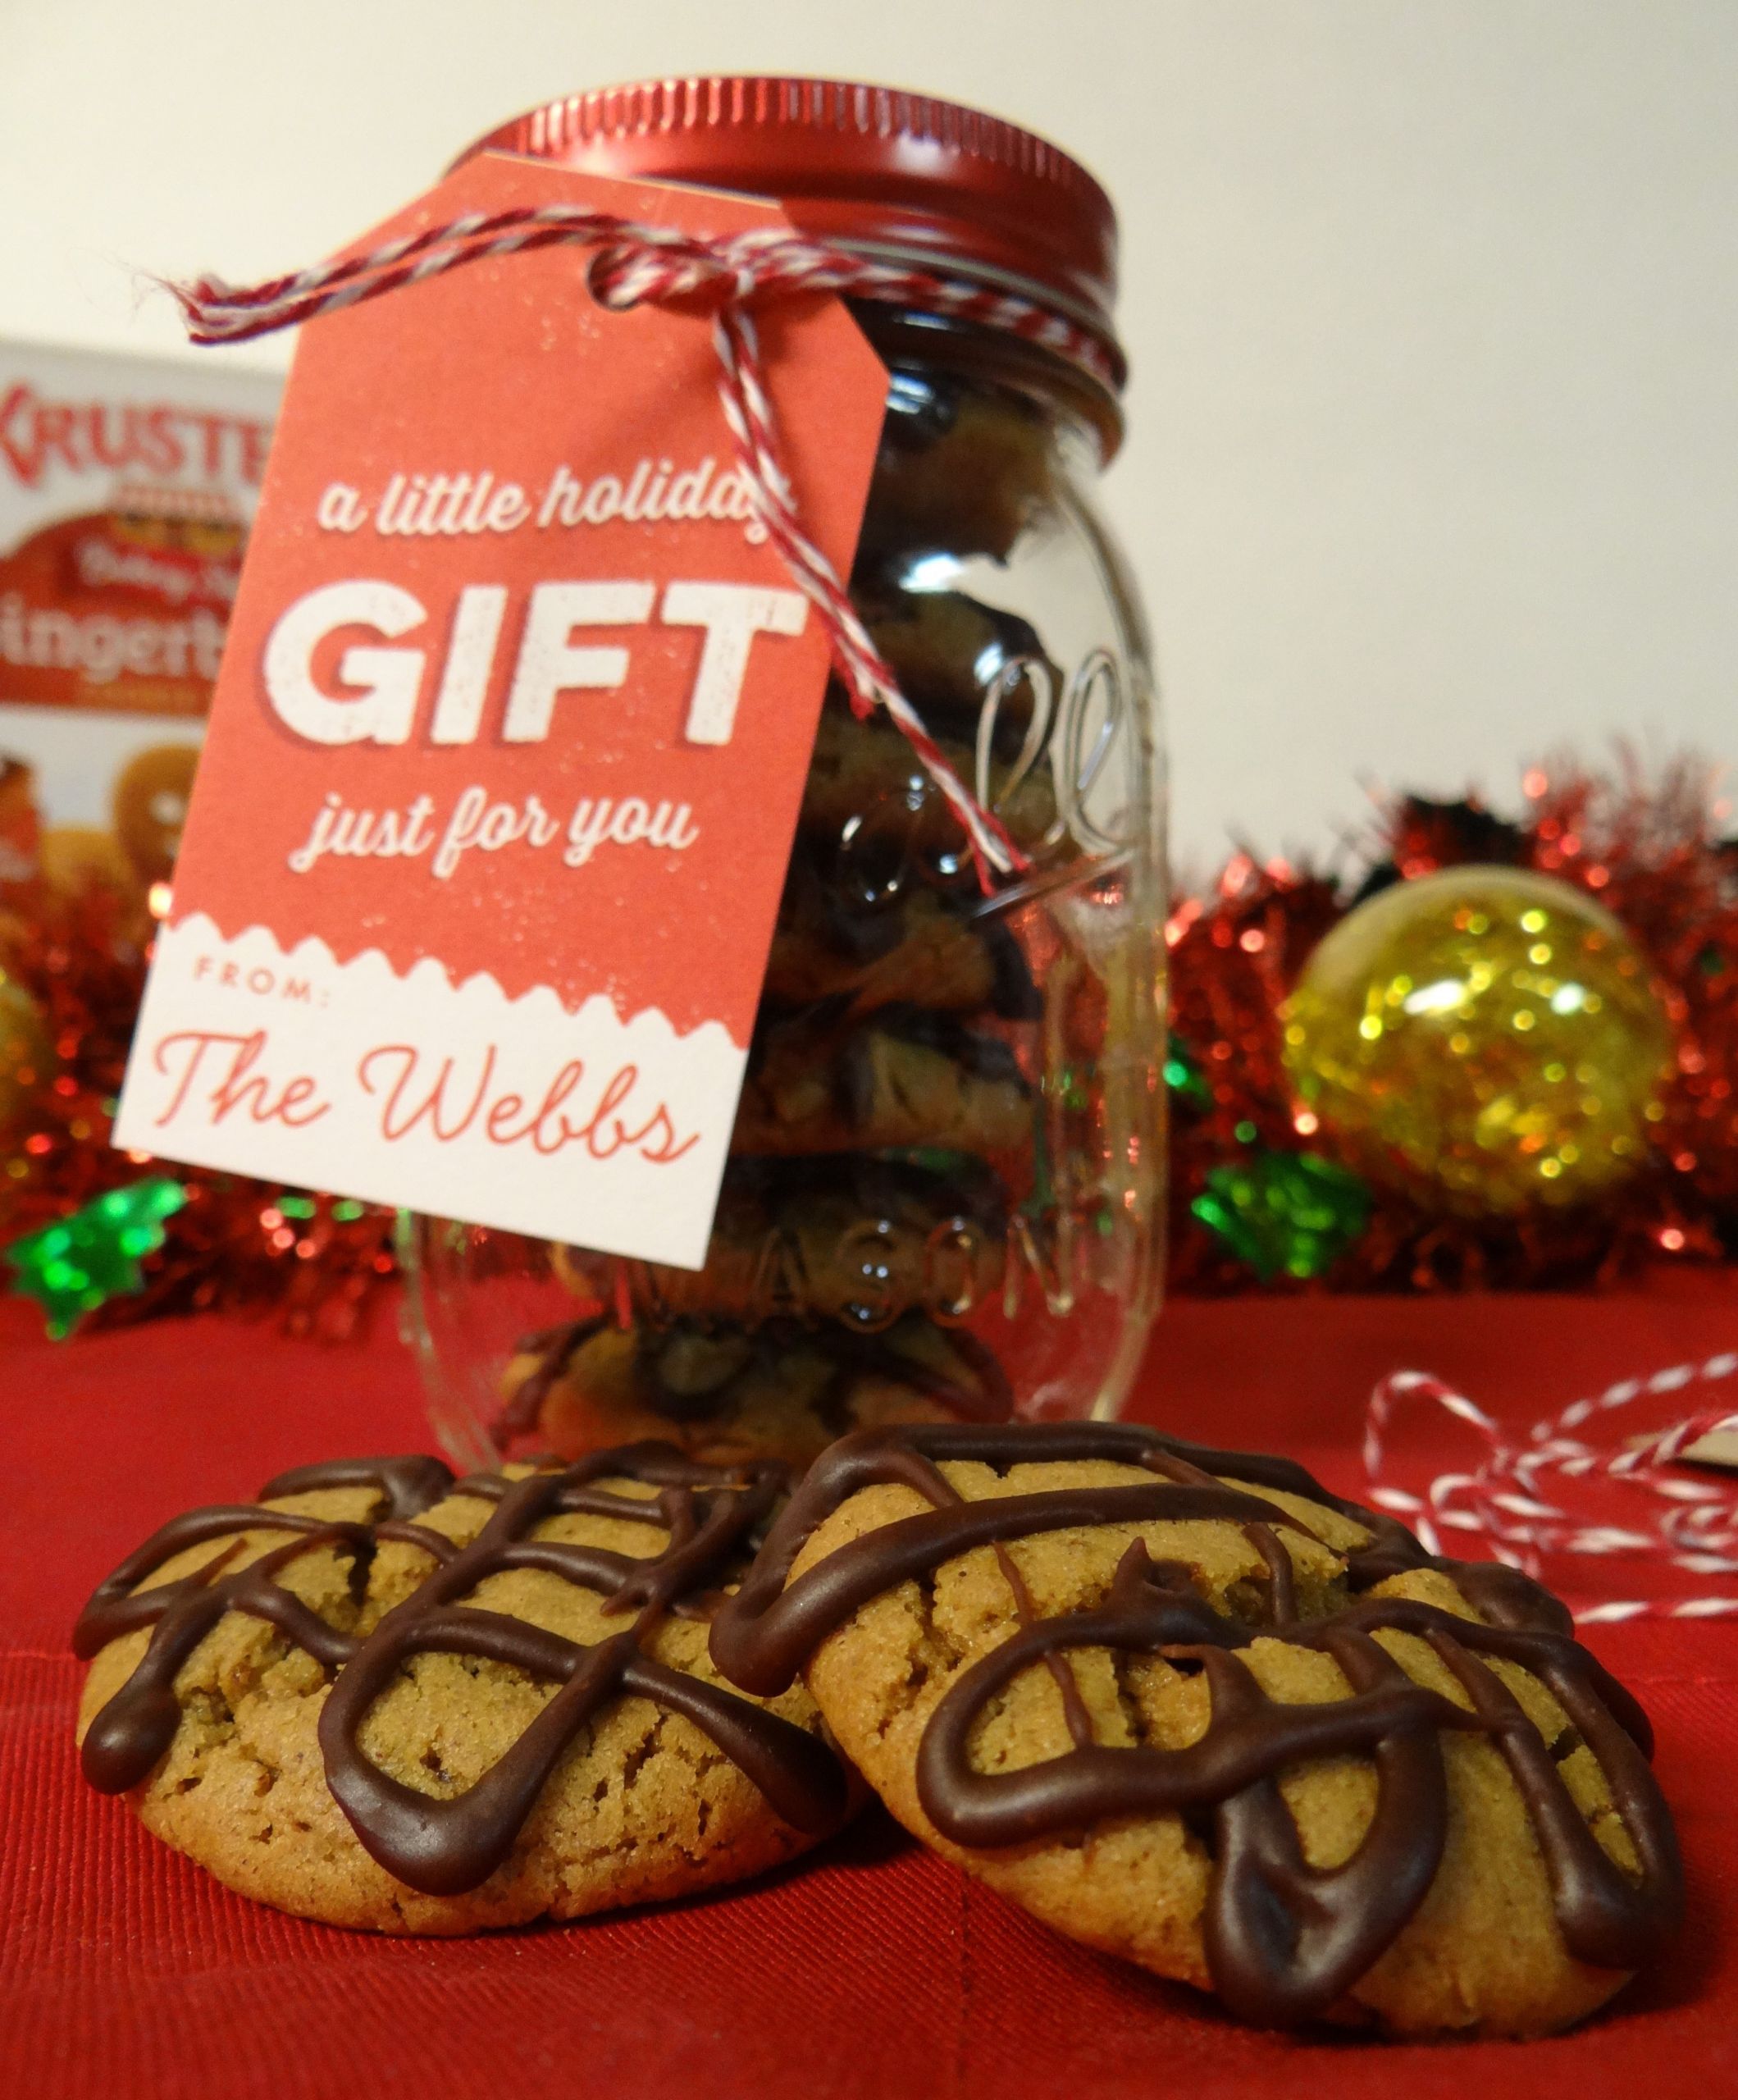 Christmas Cookie Gift Ideas
 Quick and Easy Christmas Cookie Gift Ideas mykrusteaz